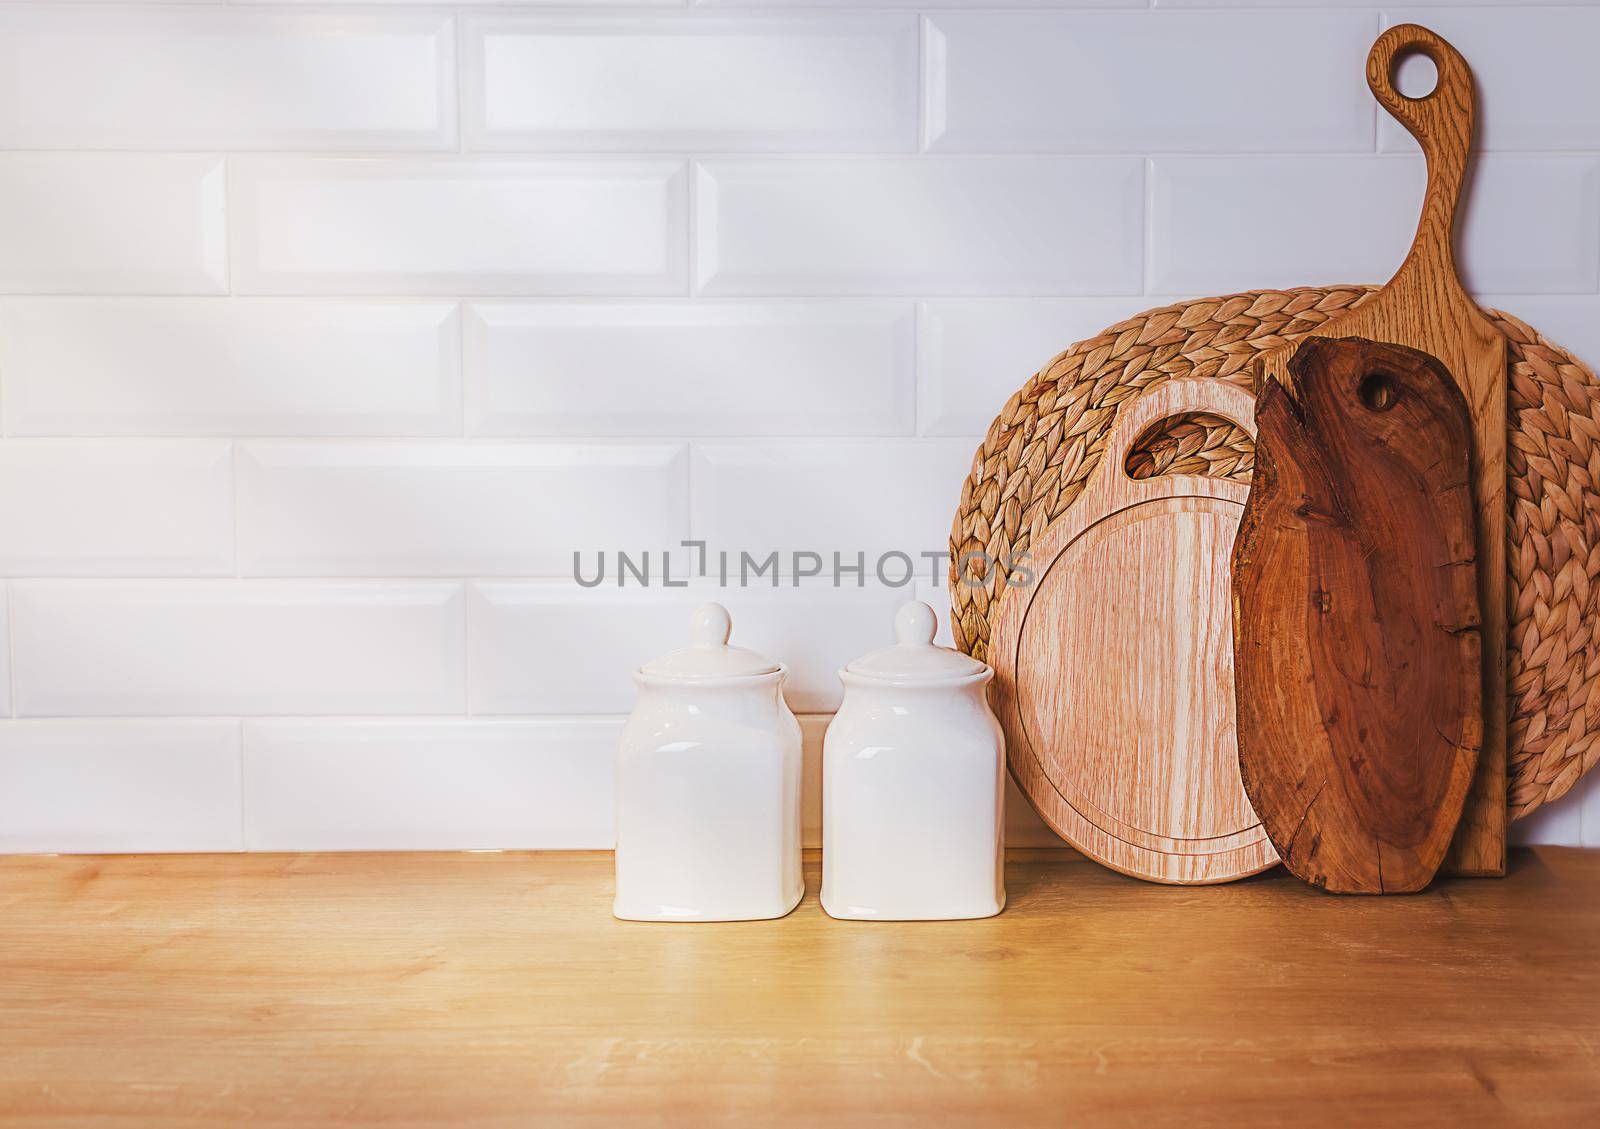 vintage kitchen template, mockup. Against white wall, kitchen utensils. Wooden cutting boards for vegetables and ceramic dishes. concept of home cooking recipes from natural products, copy your design